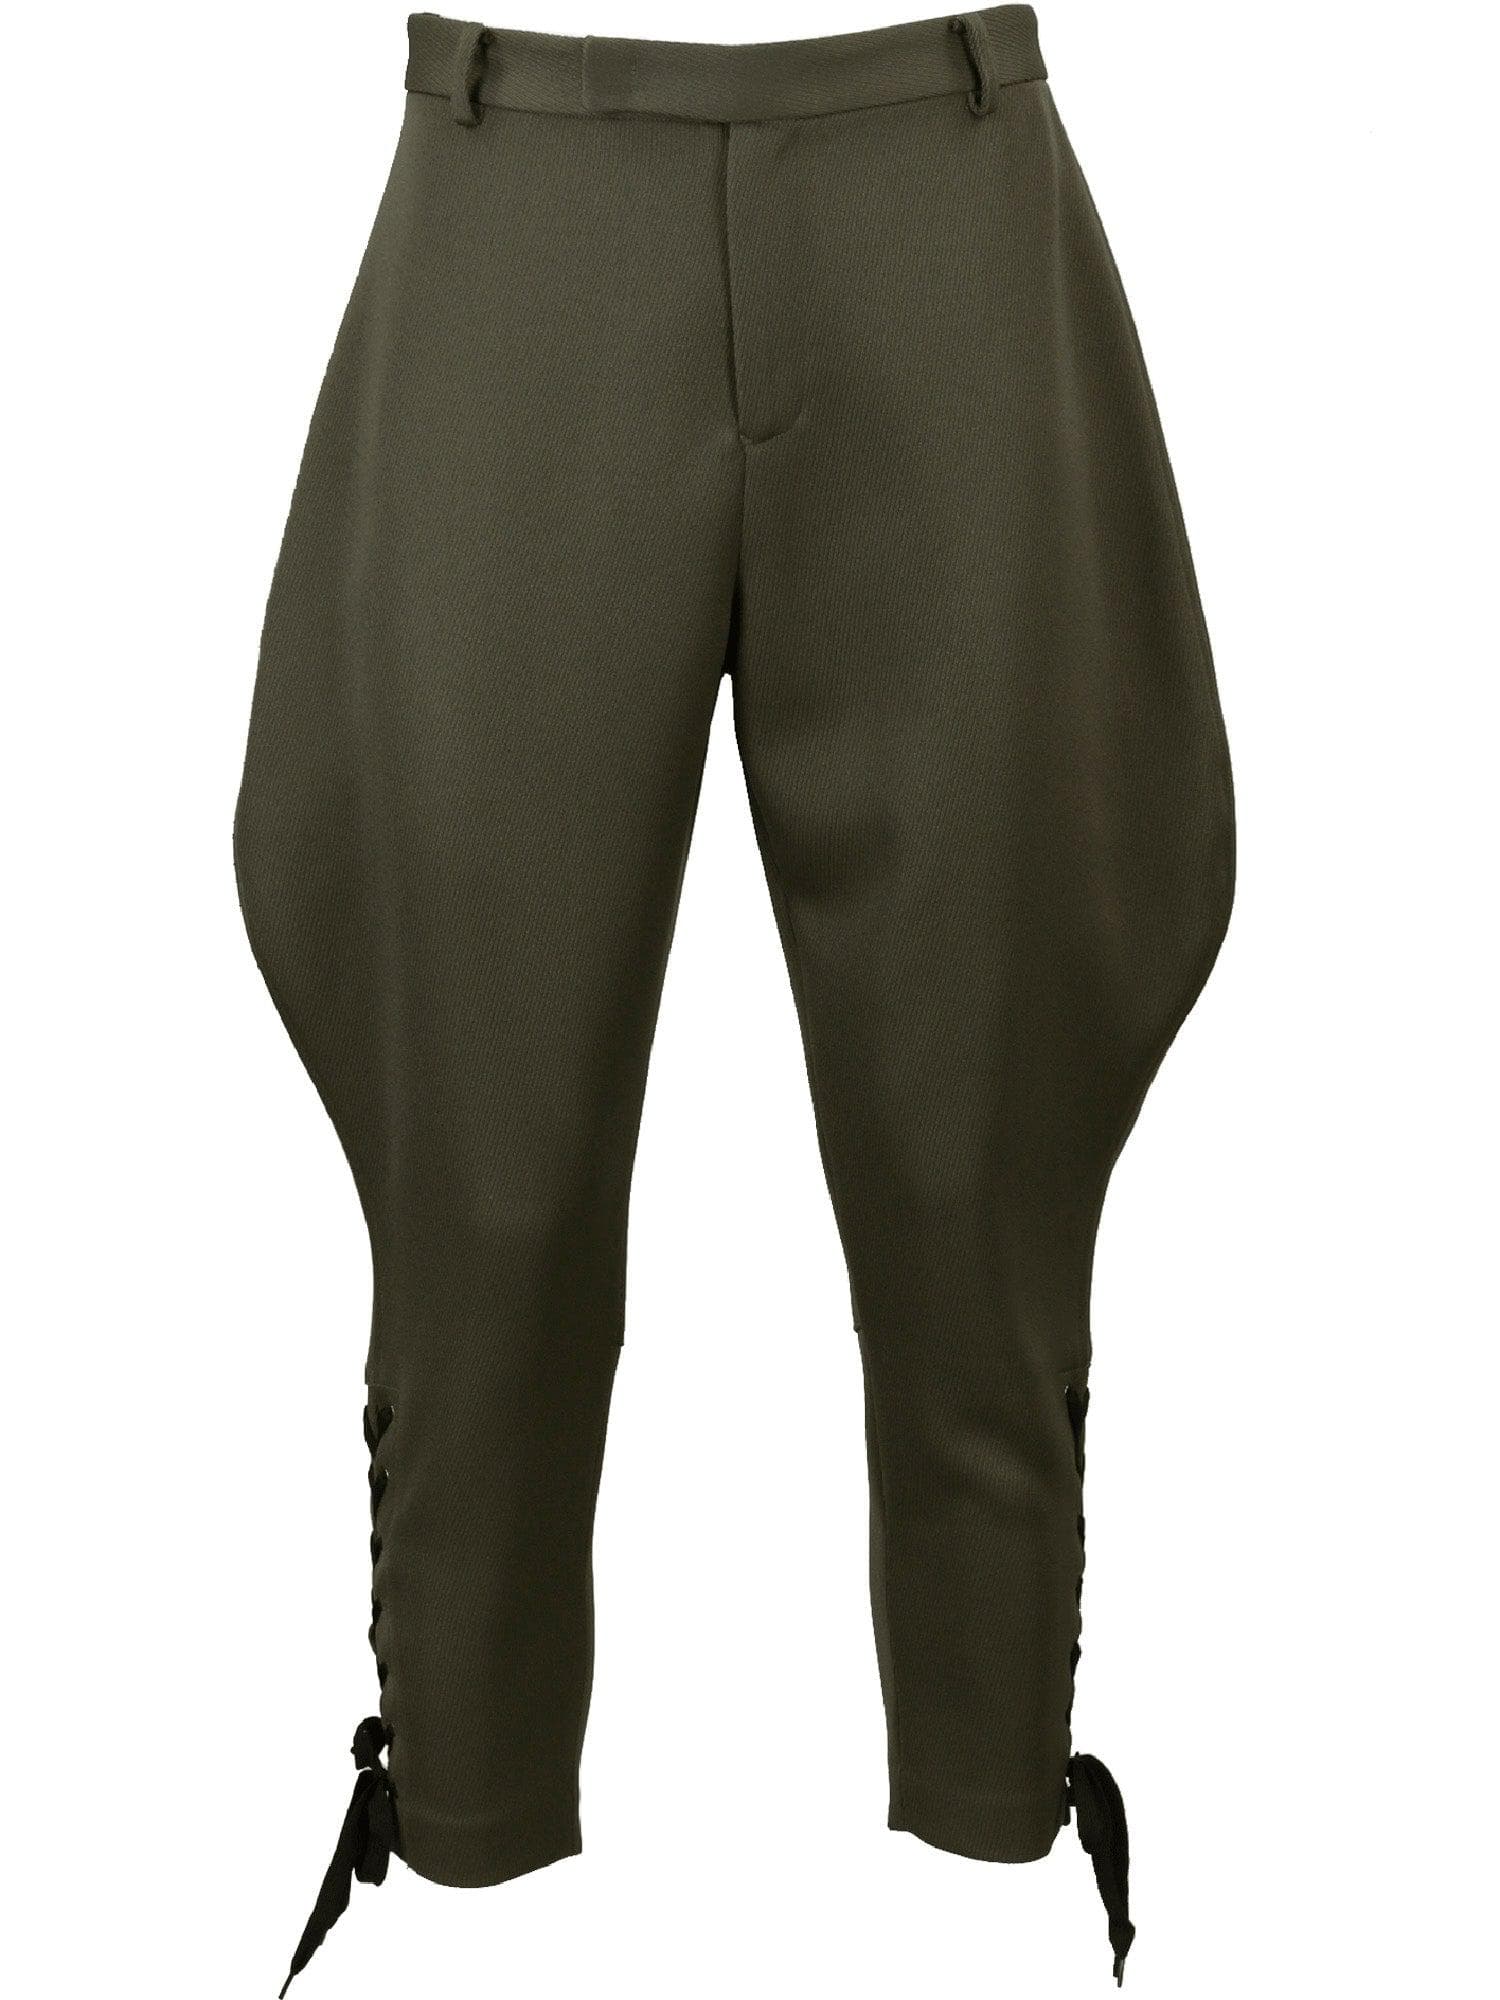 Denuo Novo - Star Wars: Imperial Officer Olive/Gray Pants Costume Accessory - costumes.com